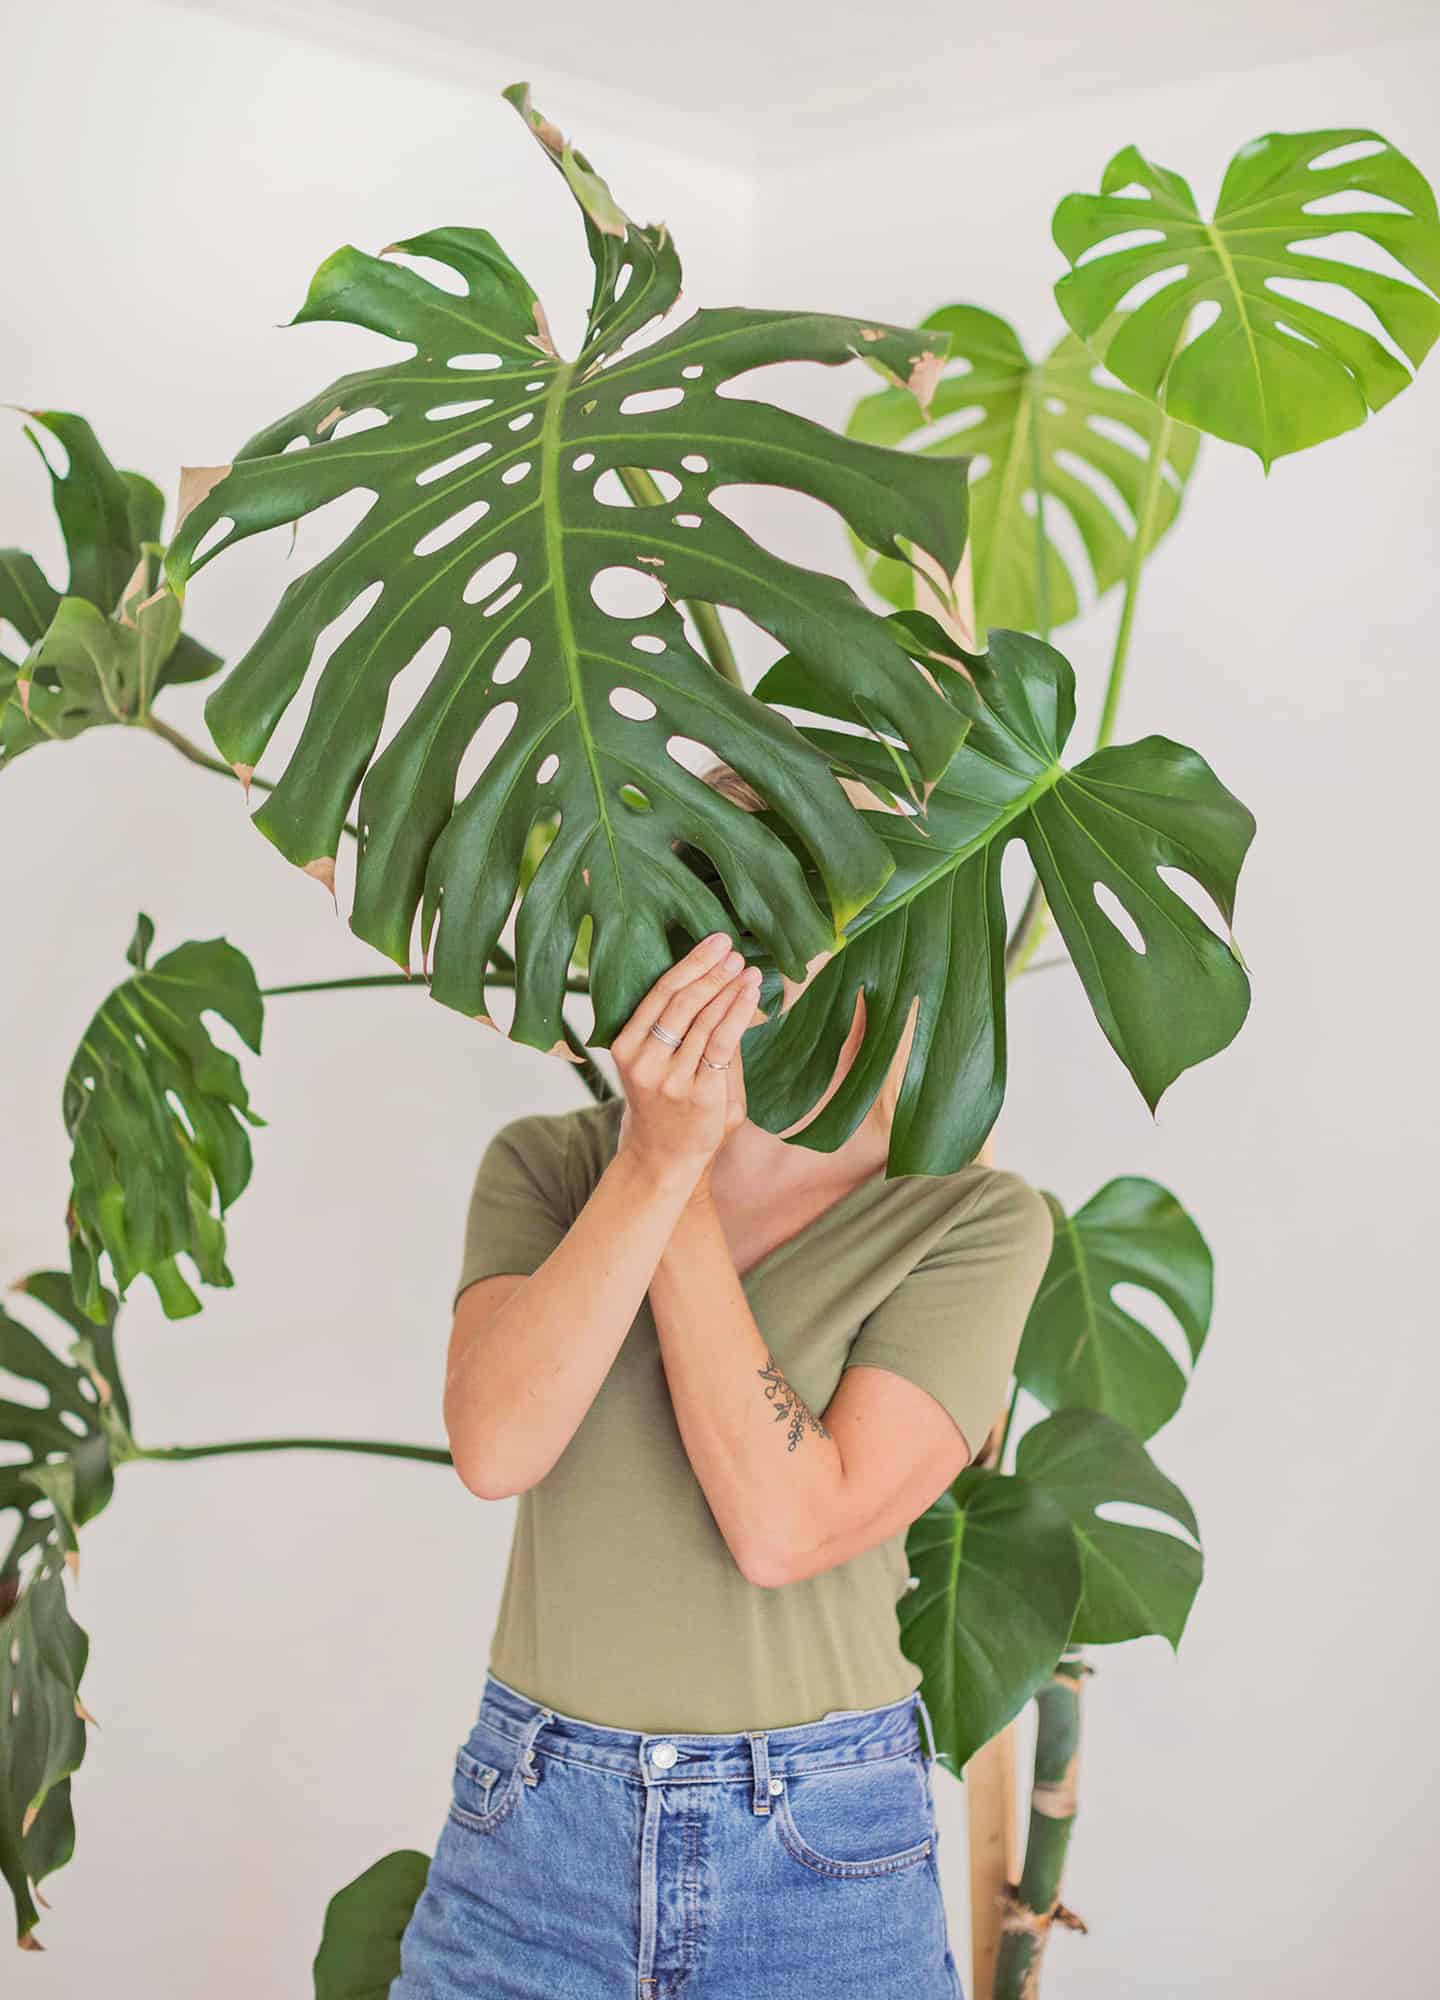 Learn how to Take care of Monstera Crops